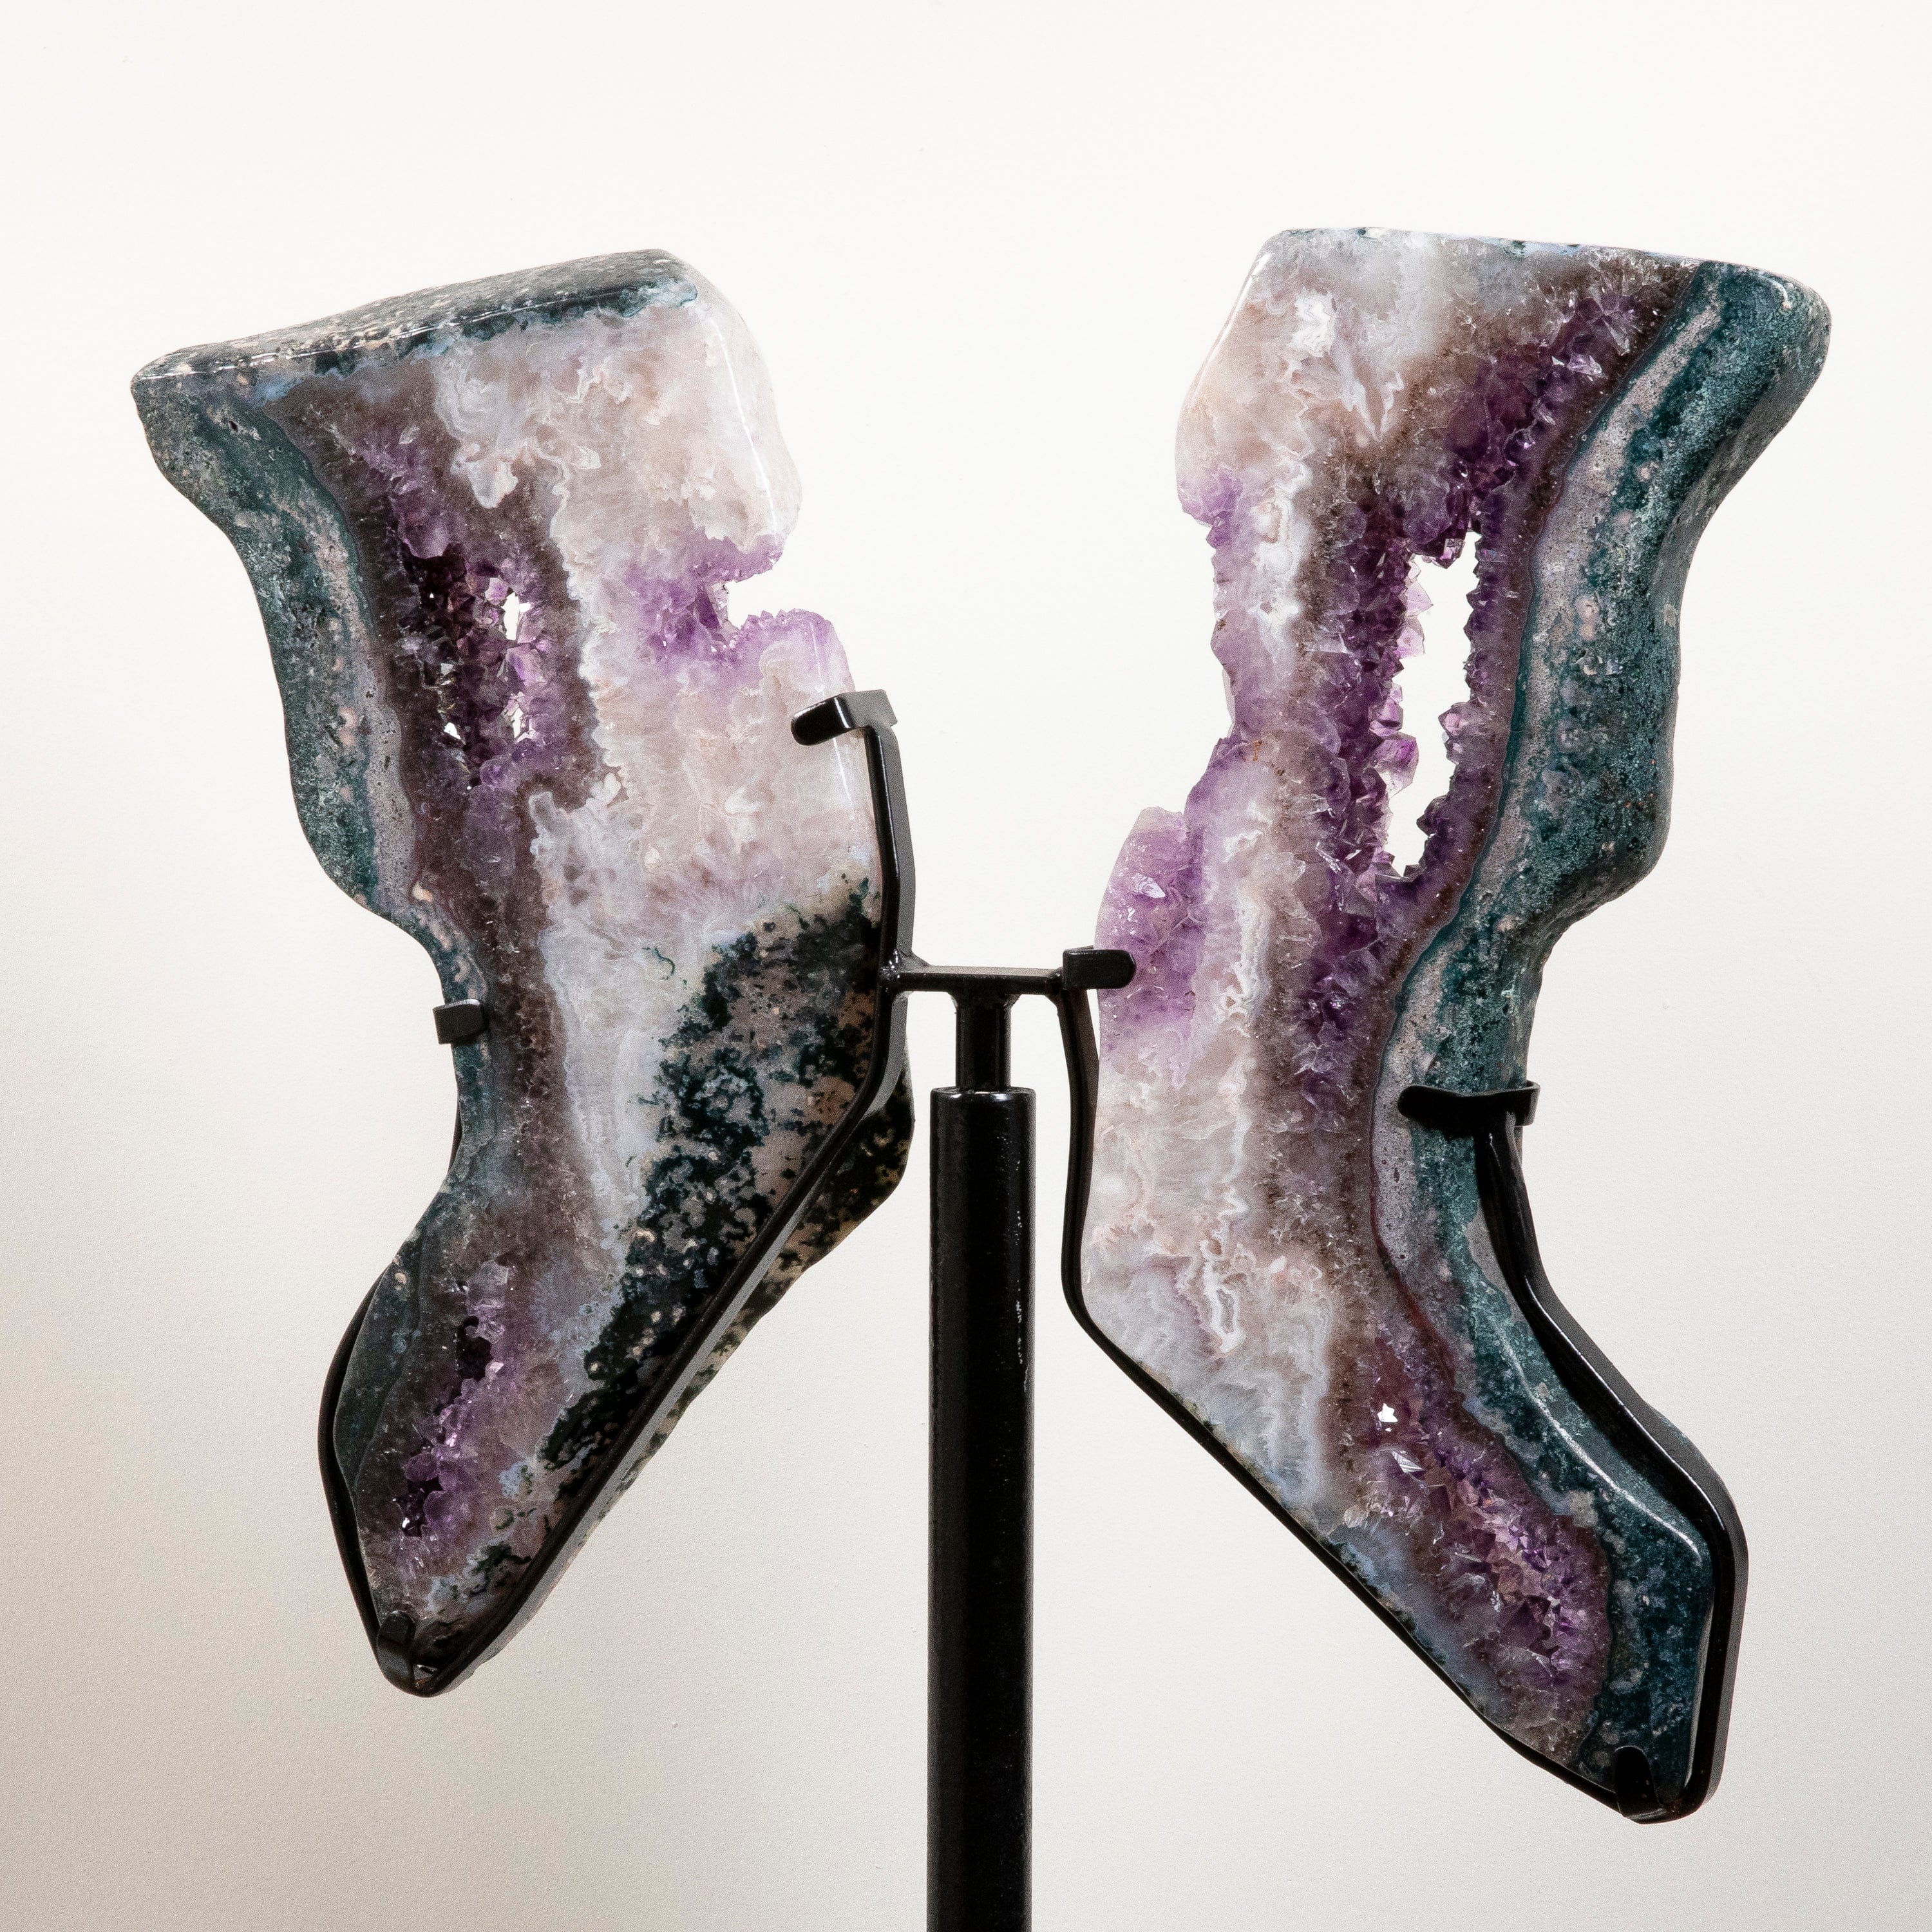 Kalifano Amethyst Amethyst Geode Wings from Brazil on Custom Stand- 38" / 44 lbs BAG8000.008